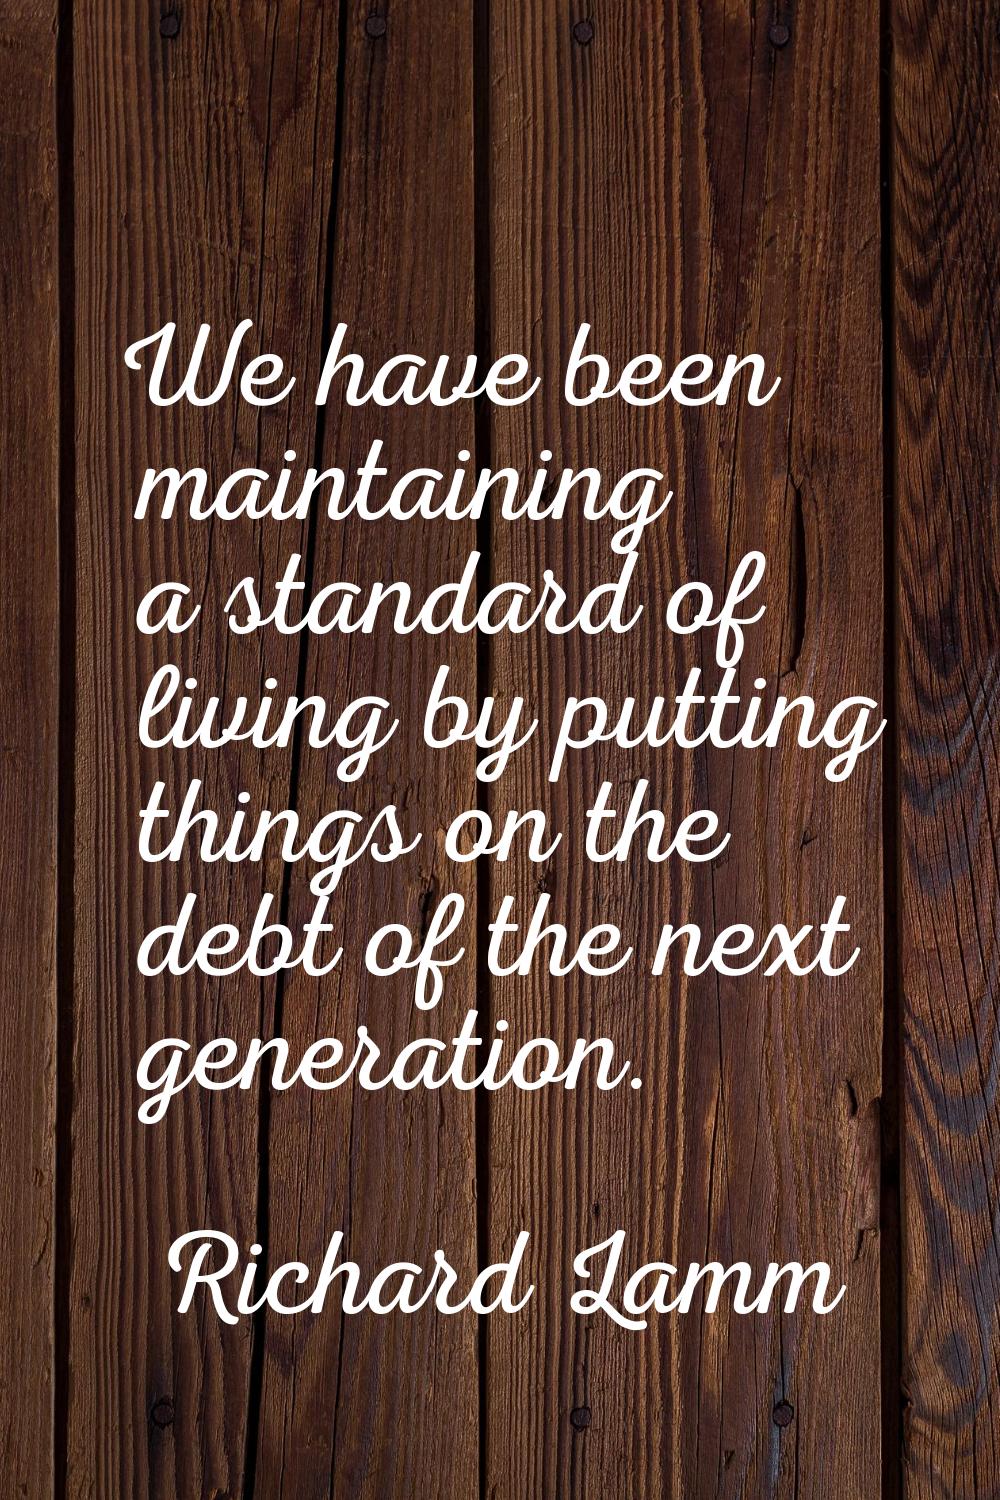 We have been maintaining a standard of living by putting things on the debt of the next generation.